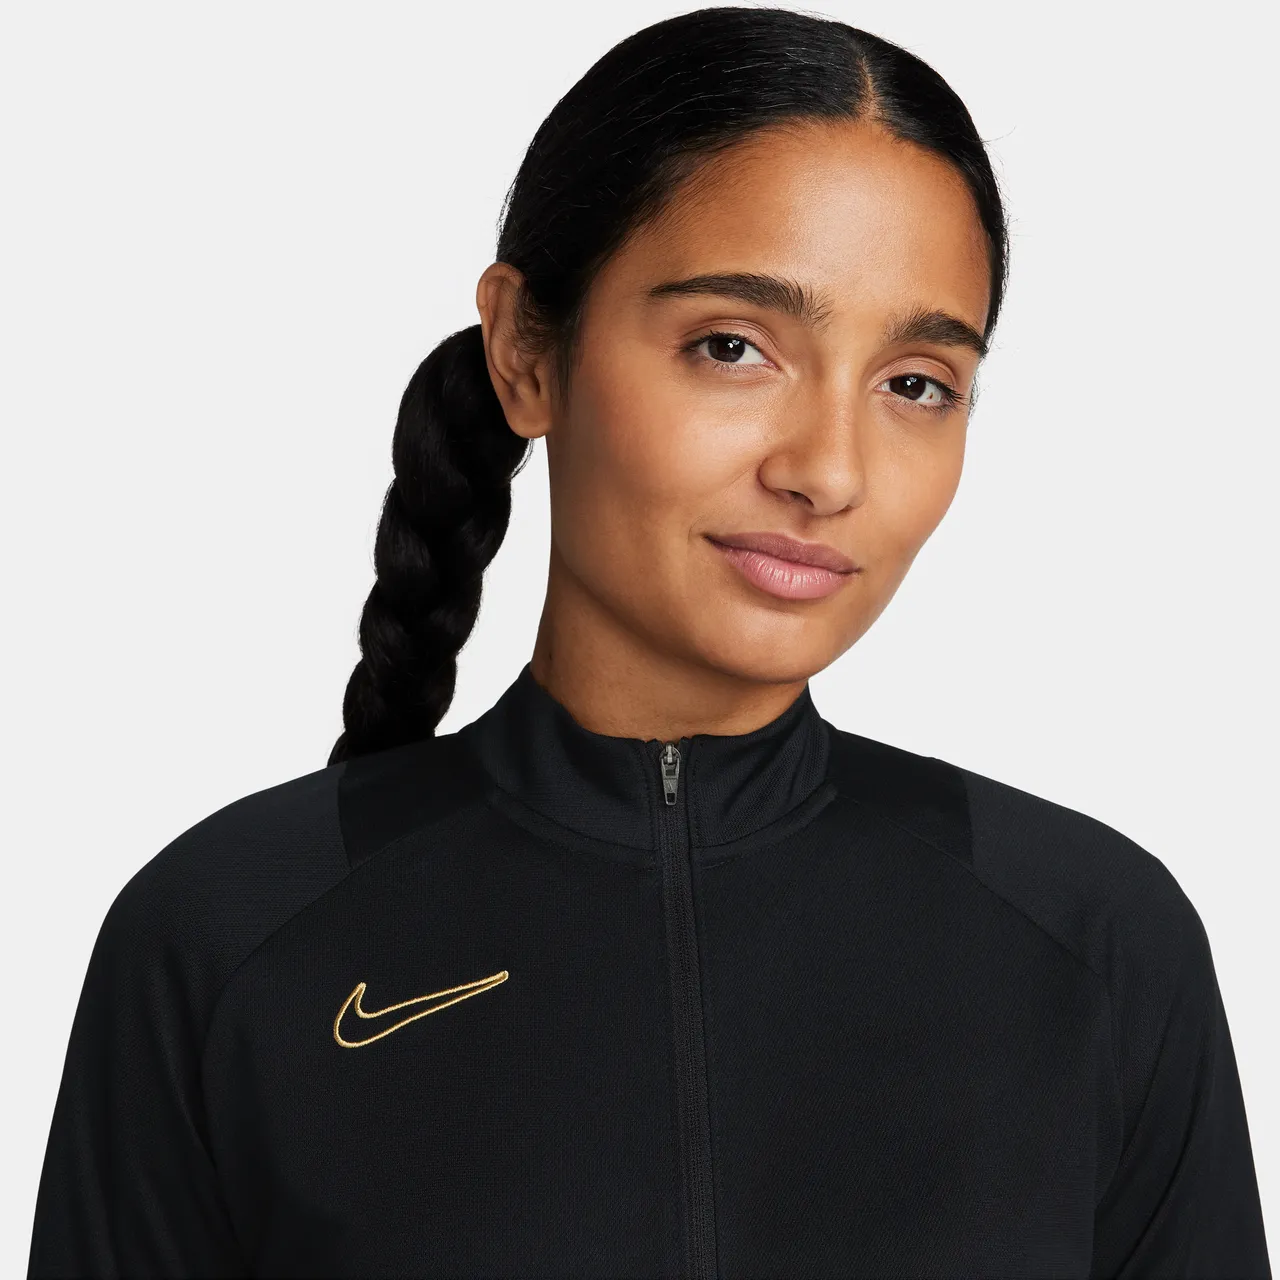 Nike Dri-FIT Academy Women's Tracksuit - Black - Polyester